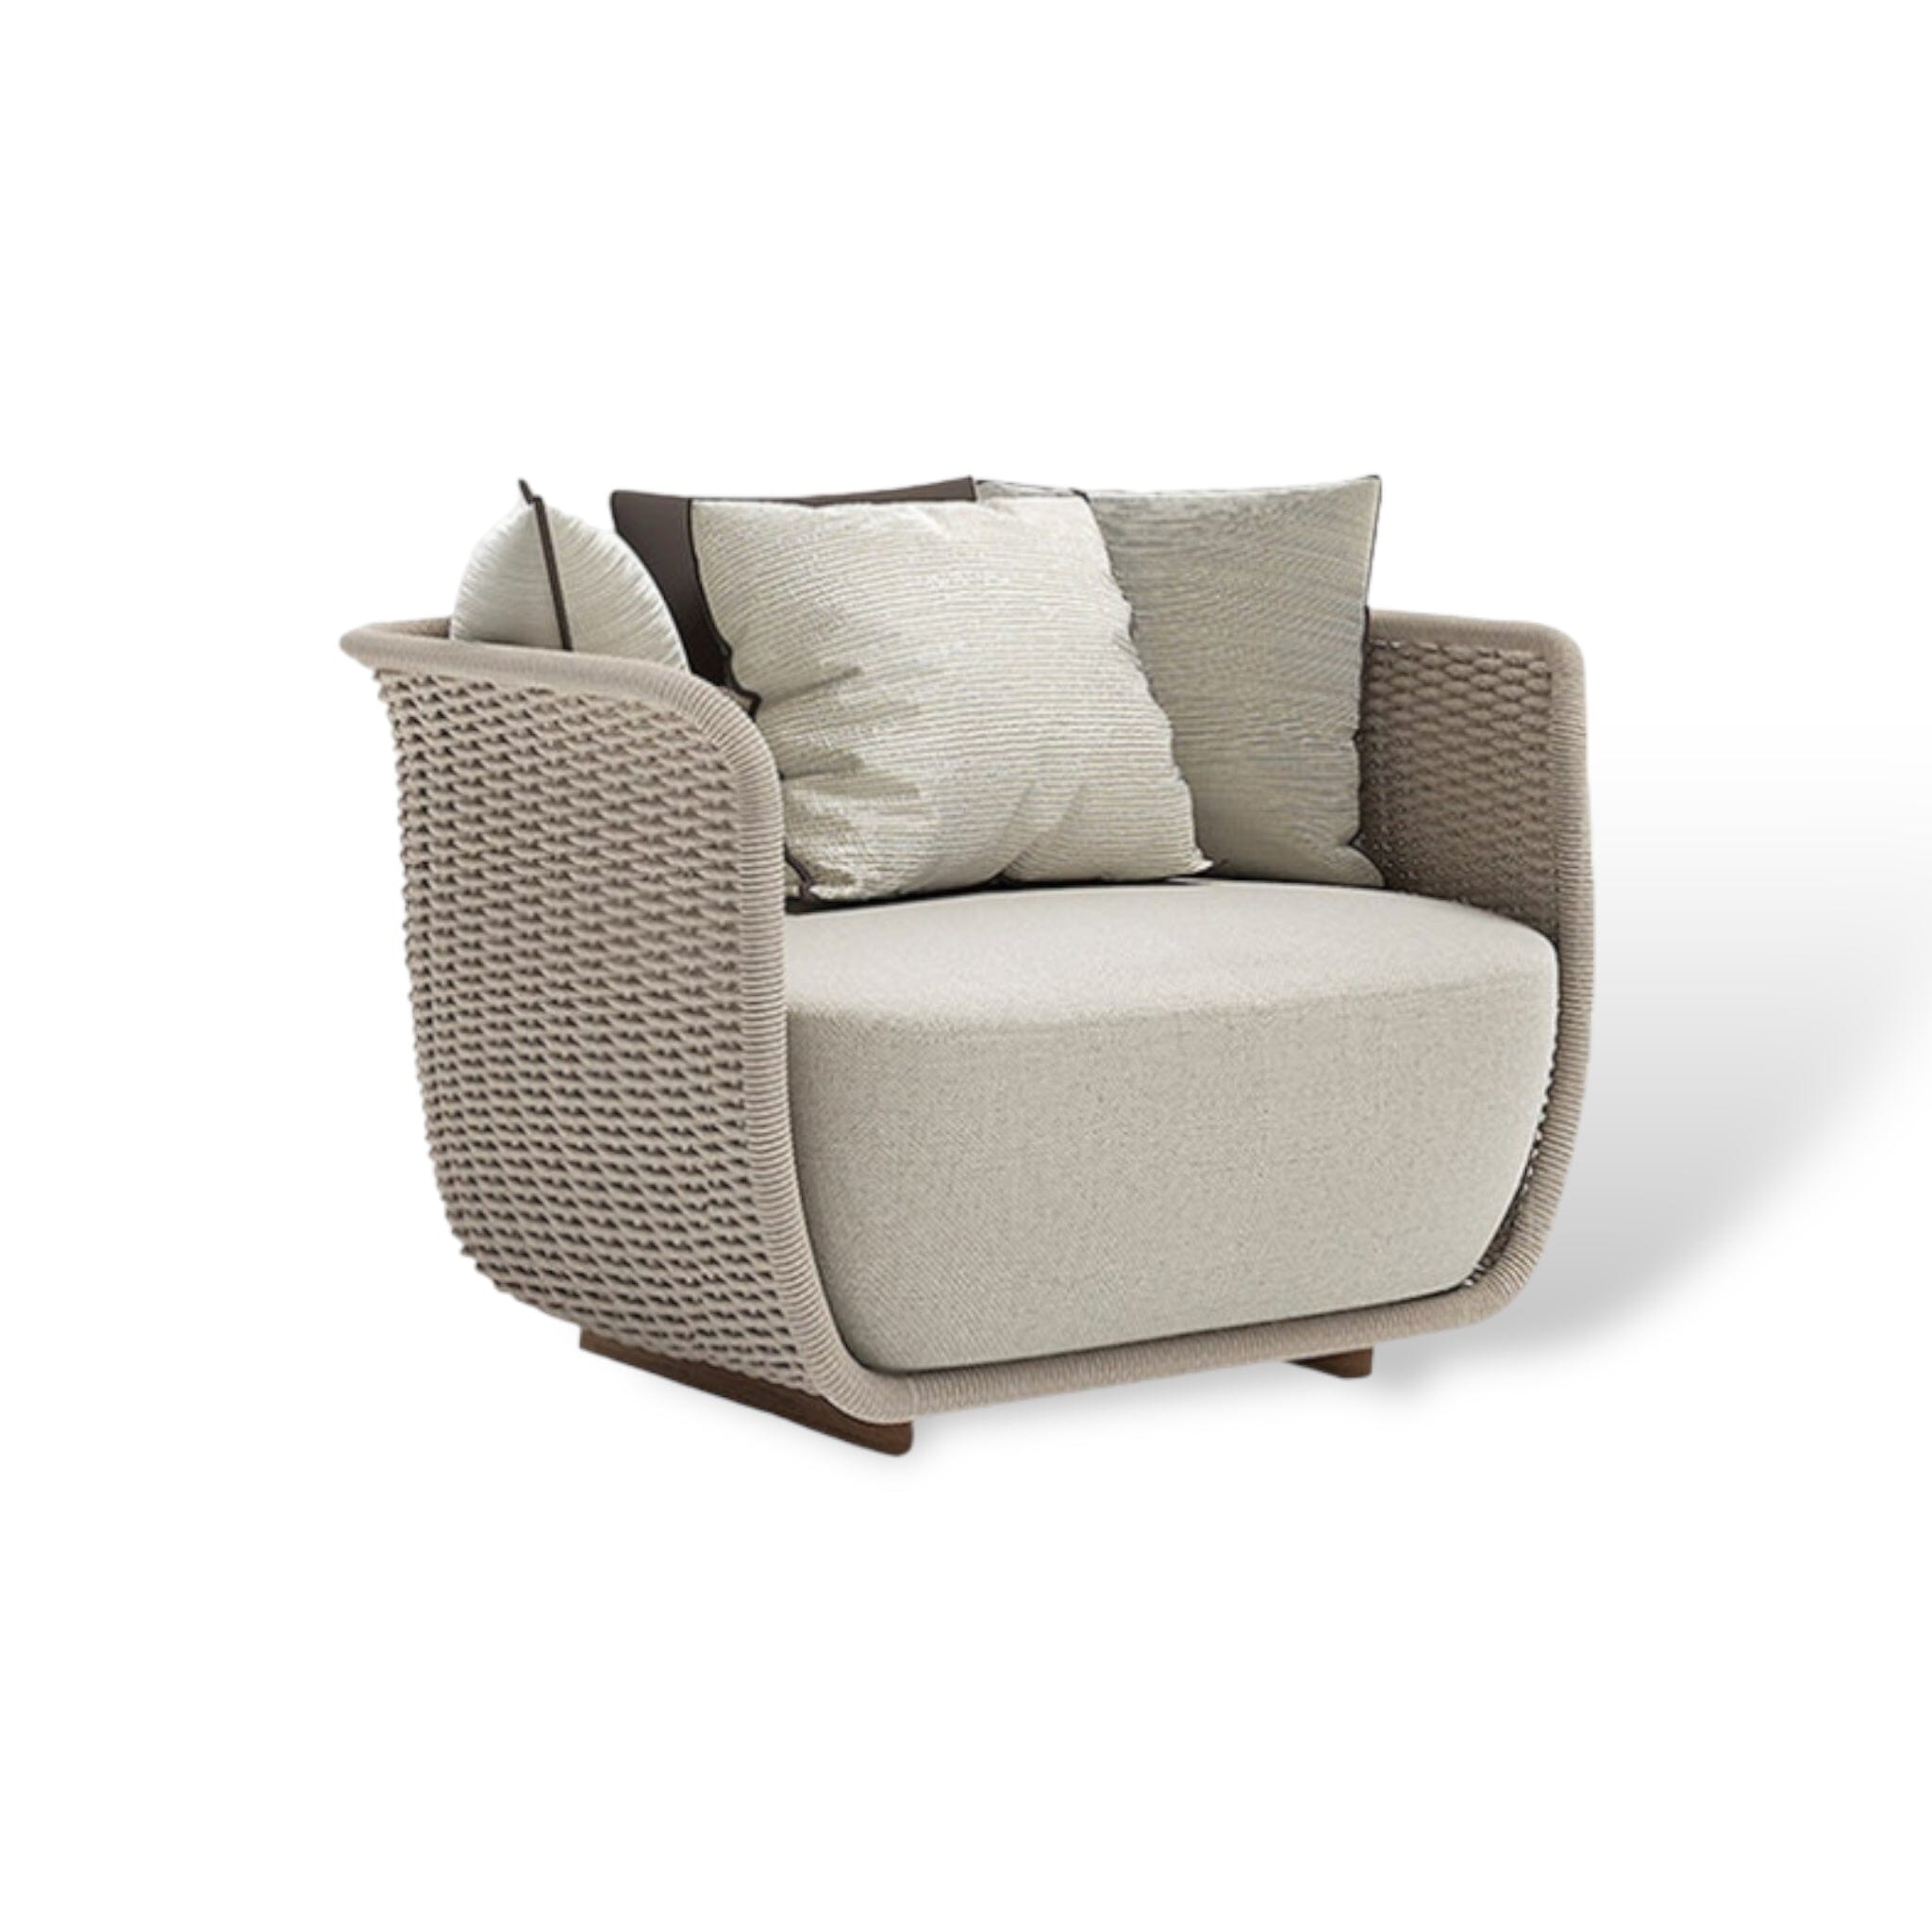 Cour Moderne Outdoor Collection Outdoor Furniture Khaki - Single Seater 